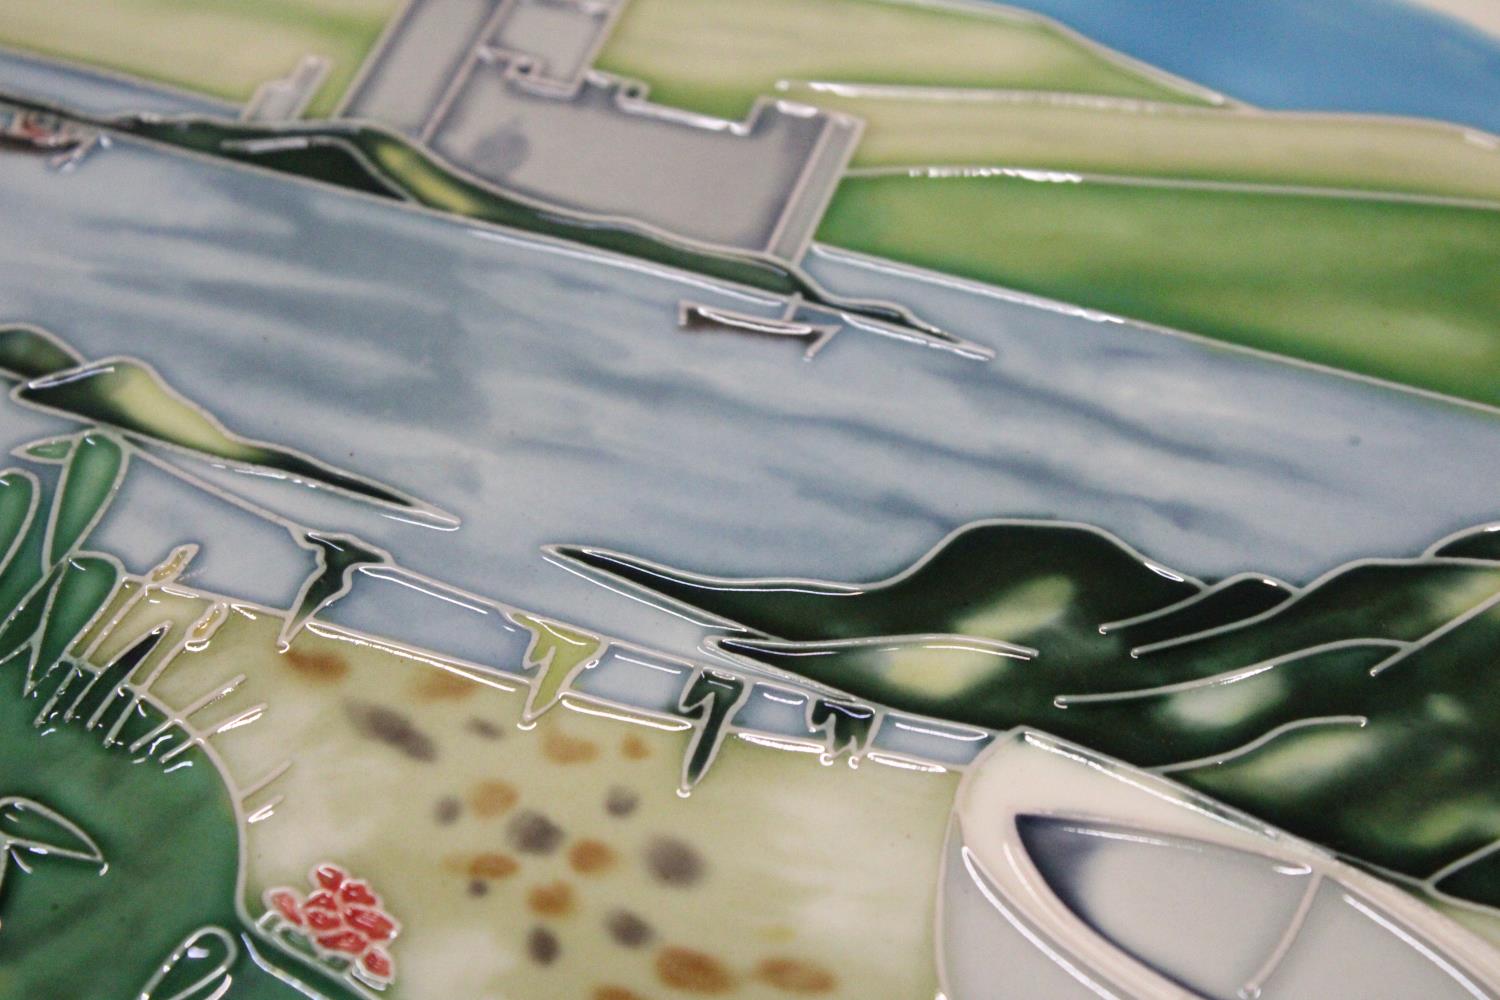 TWO HAND PAINTED CERAMIC TILES TO INCLUDE KISIMUL CASTLE PLUS A INDOOR CAFE SCENE - Image 6 of 7